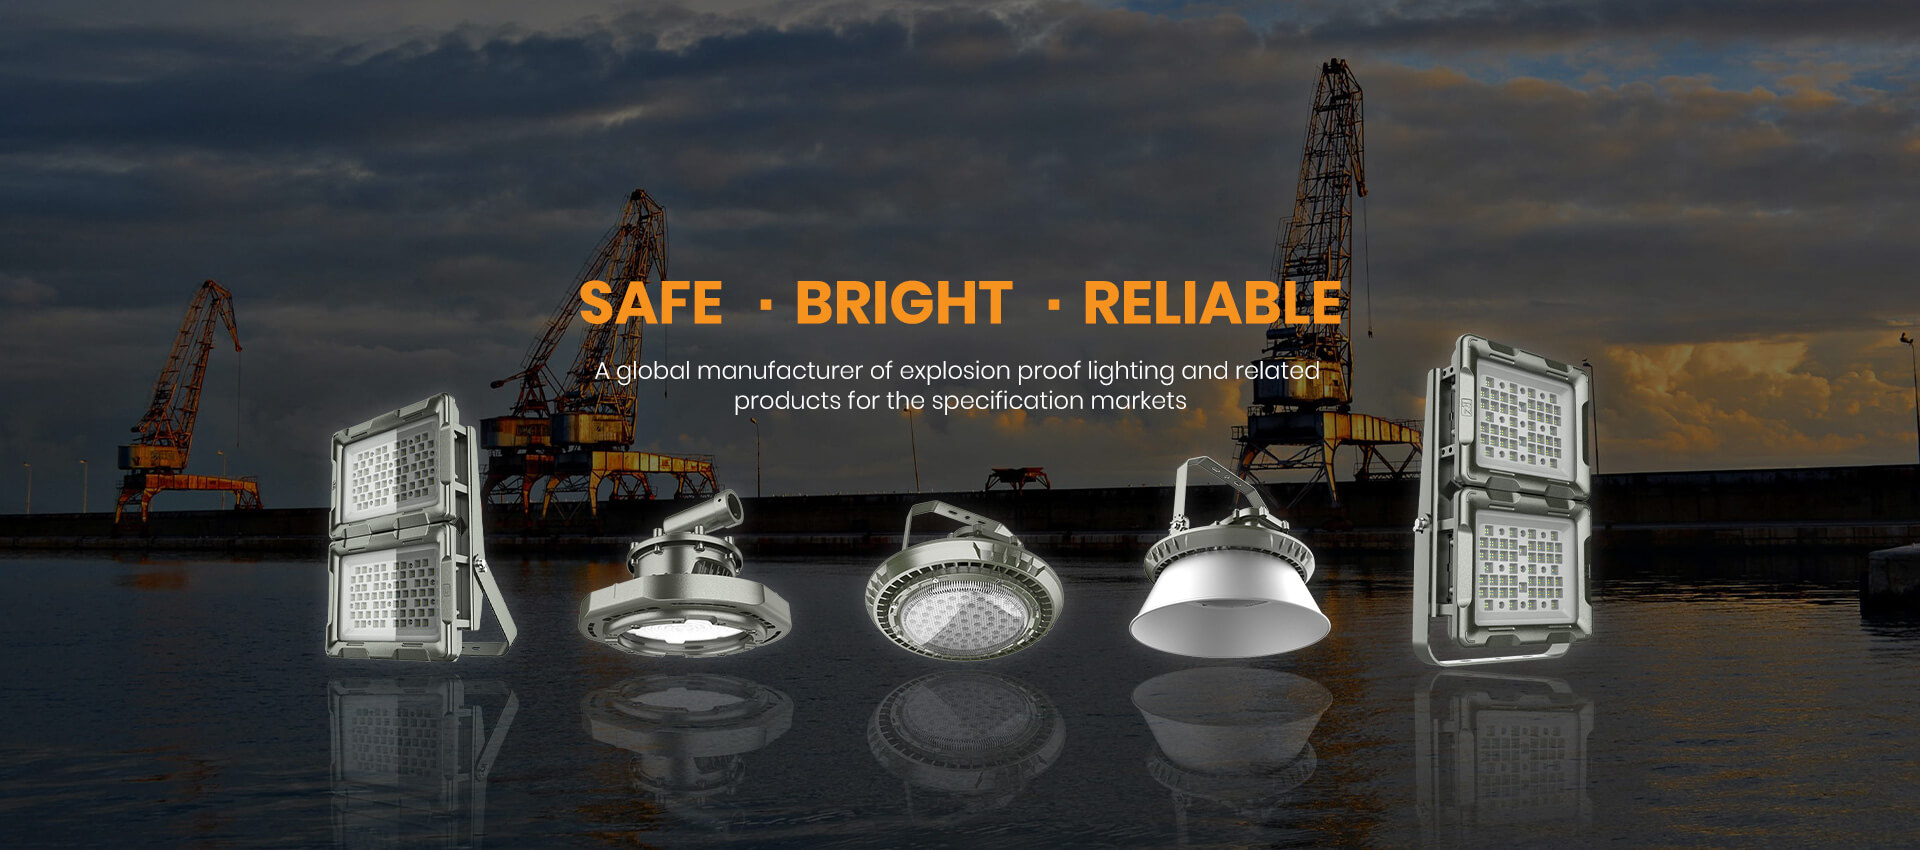 A global manufacturer of explosion proof lighting and related products for the specification markets